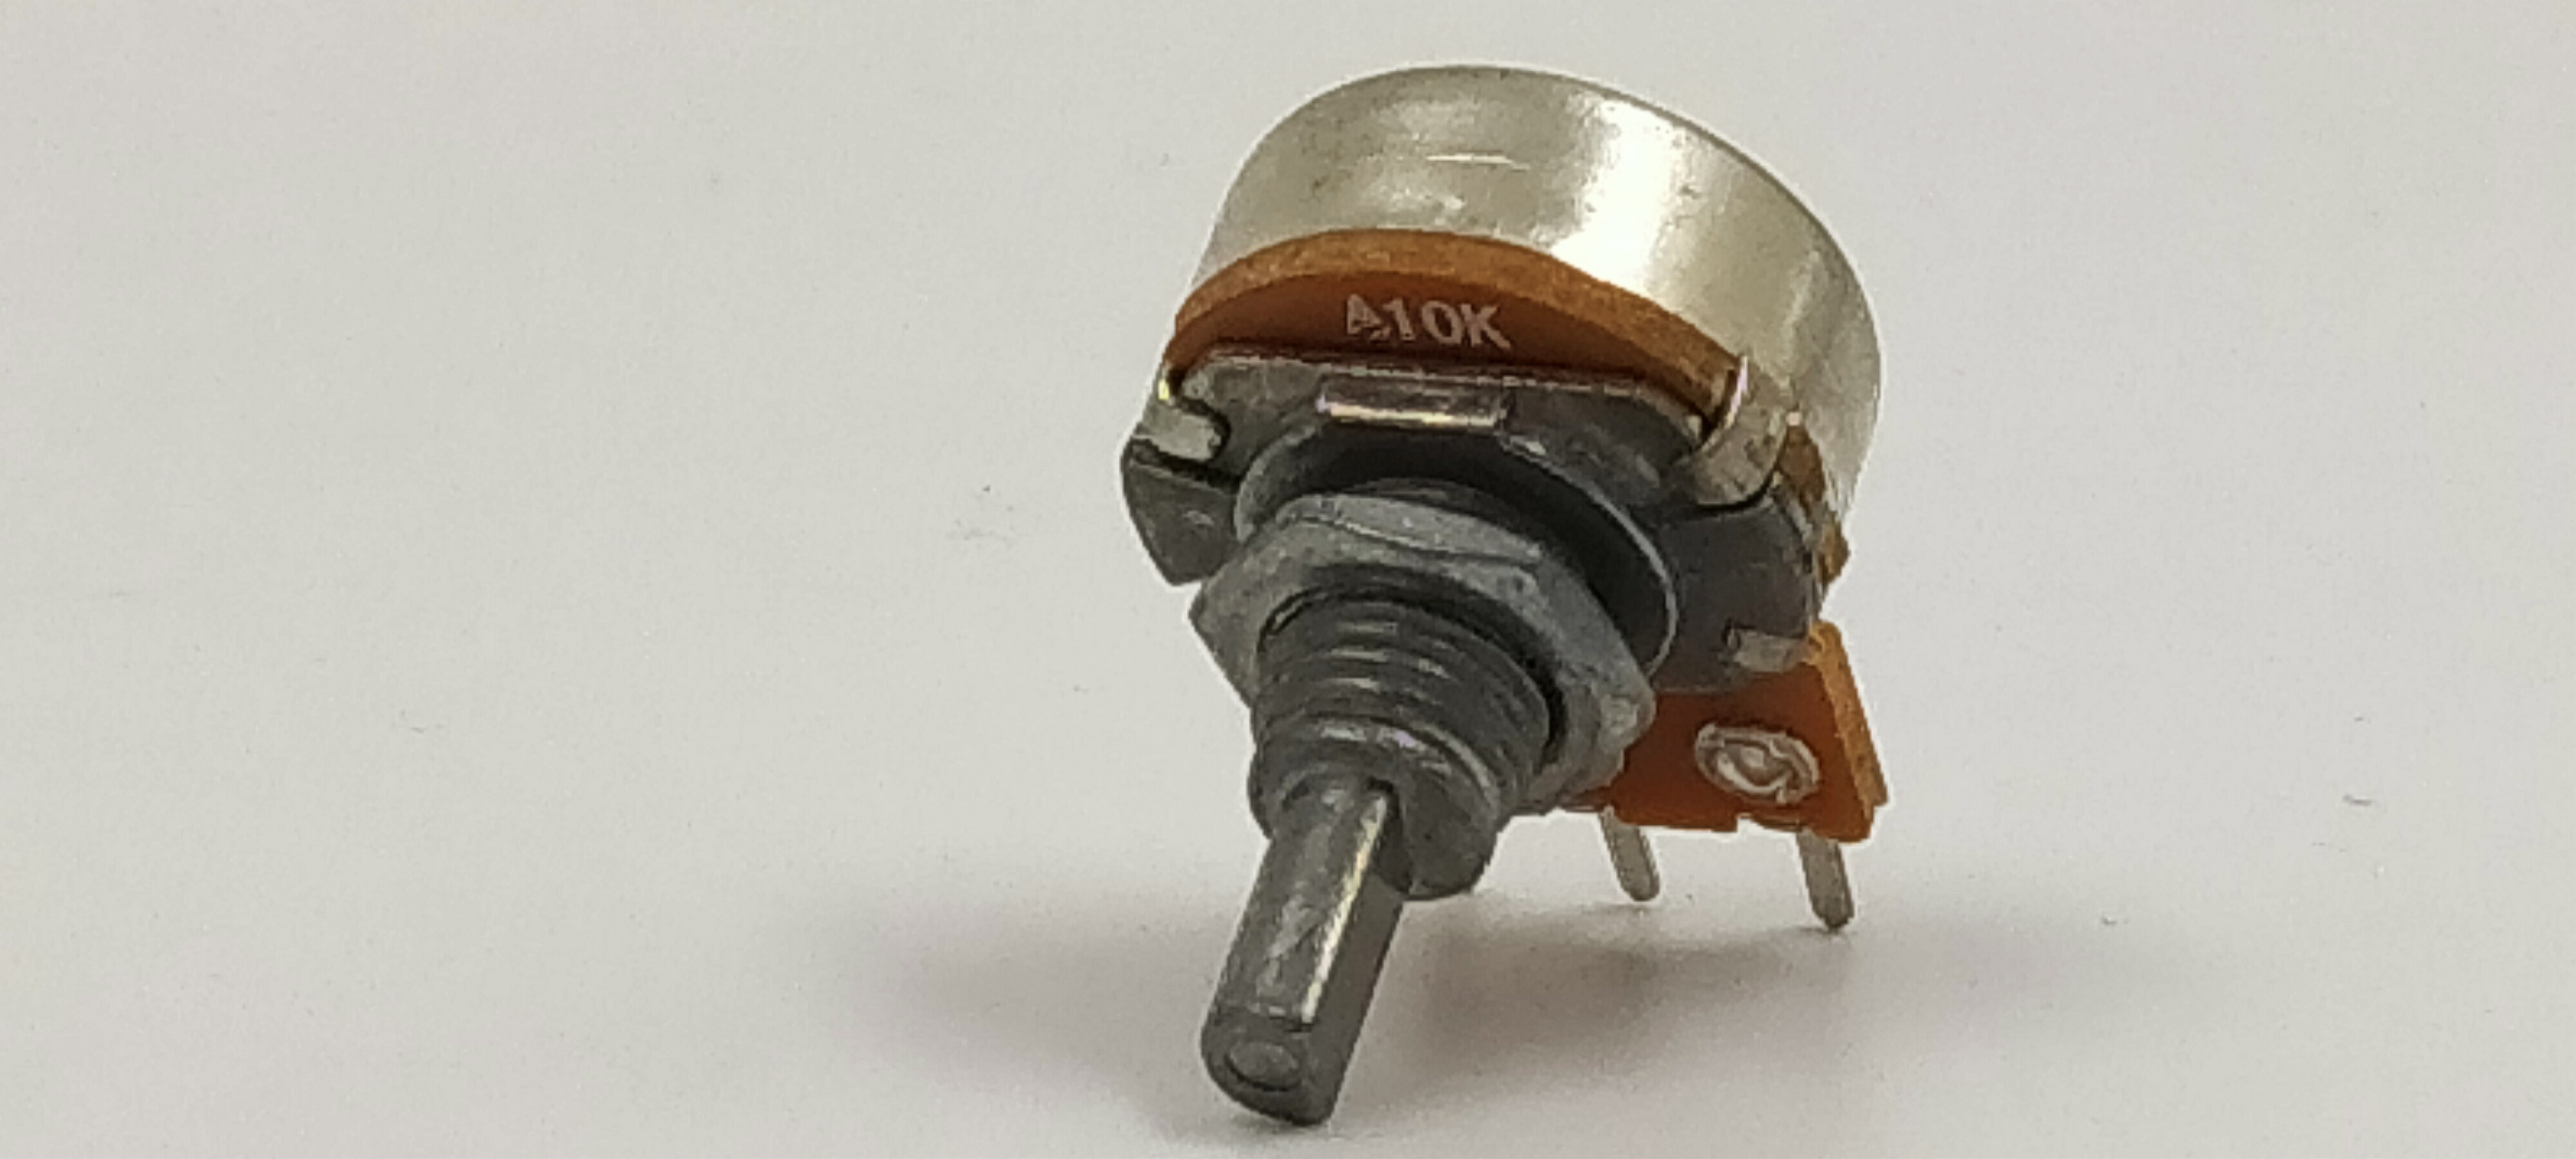 Potentiometer For Packaging Machine